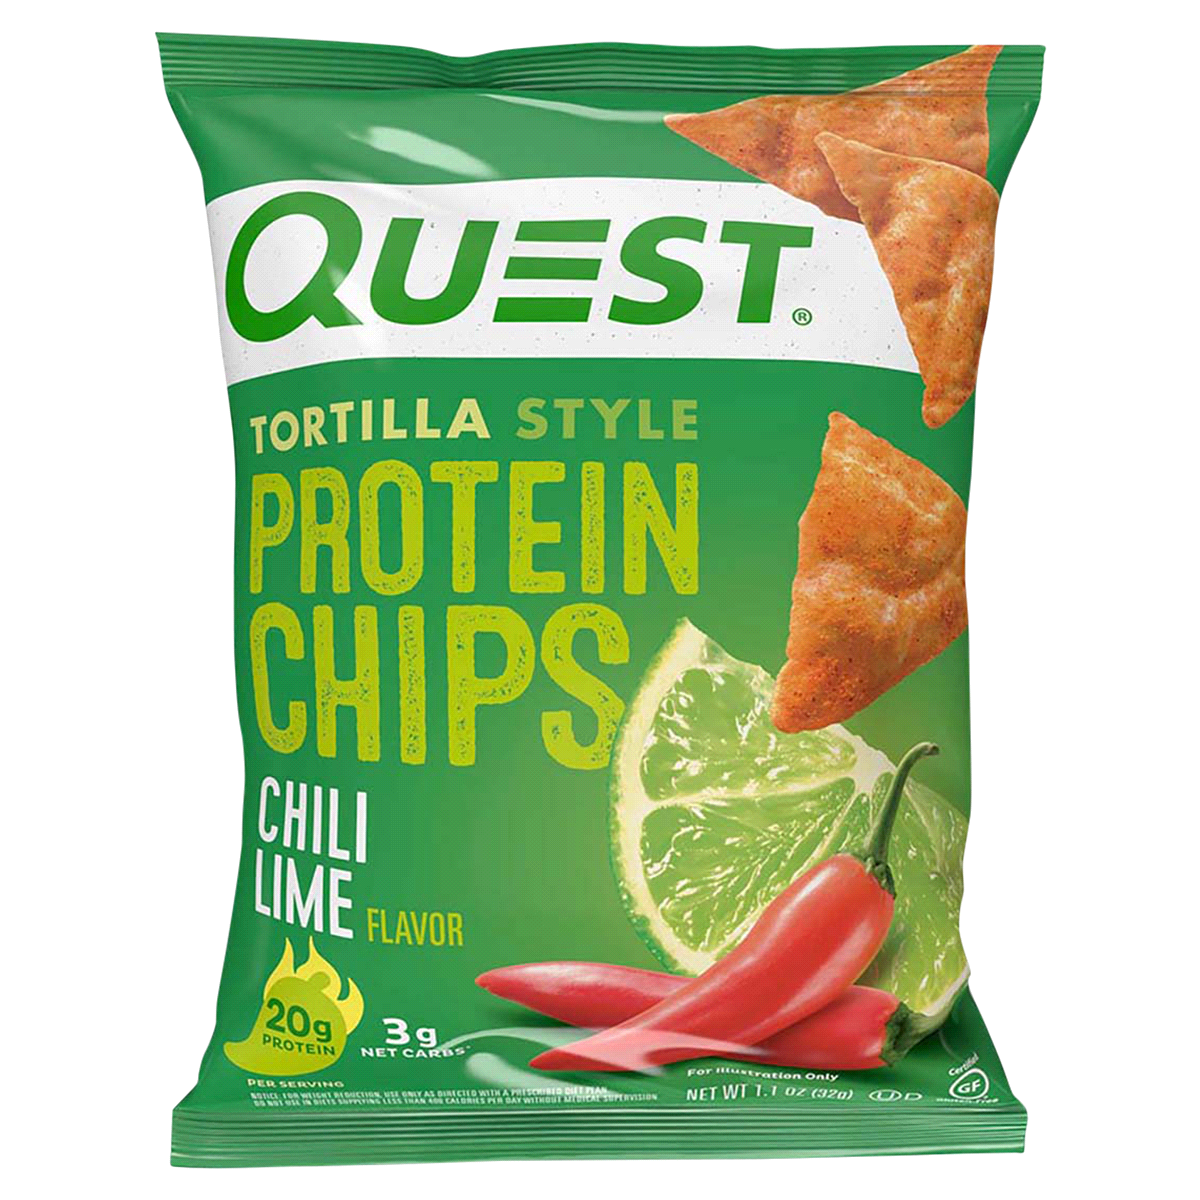 slide 1 of 9, Quest Tortilla Style Chili Lime Flavor Protein Chips 1.1 oz, 1.1 oz